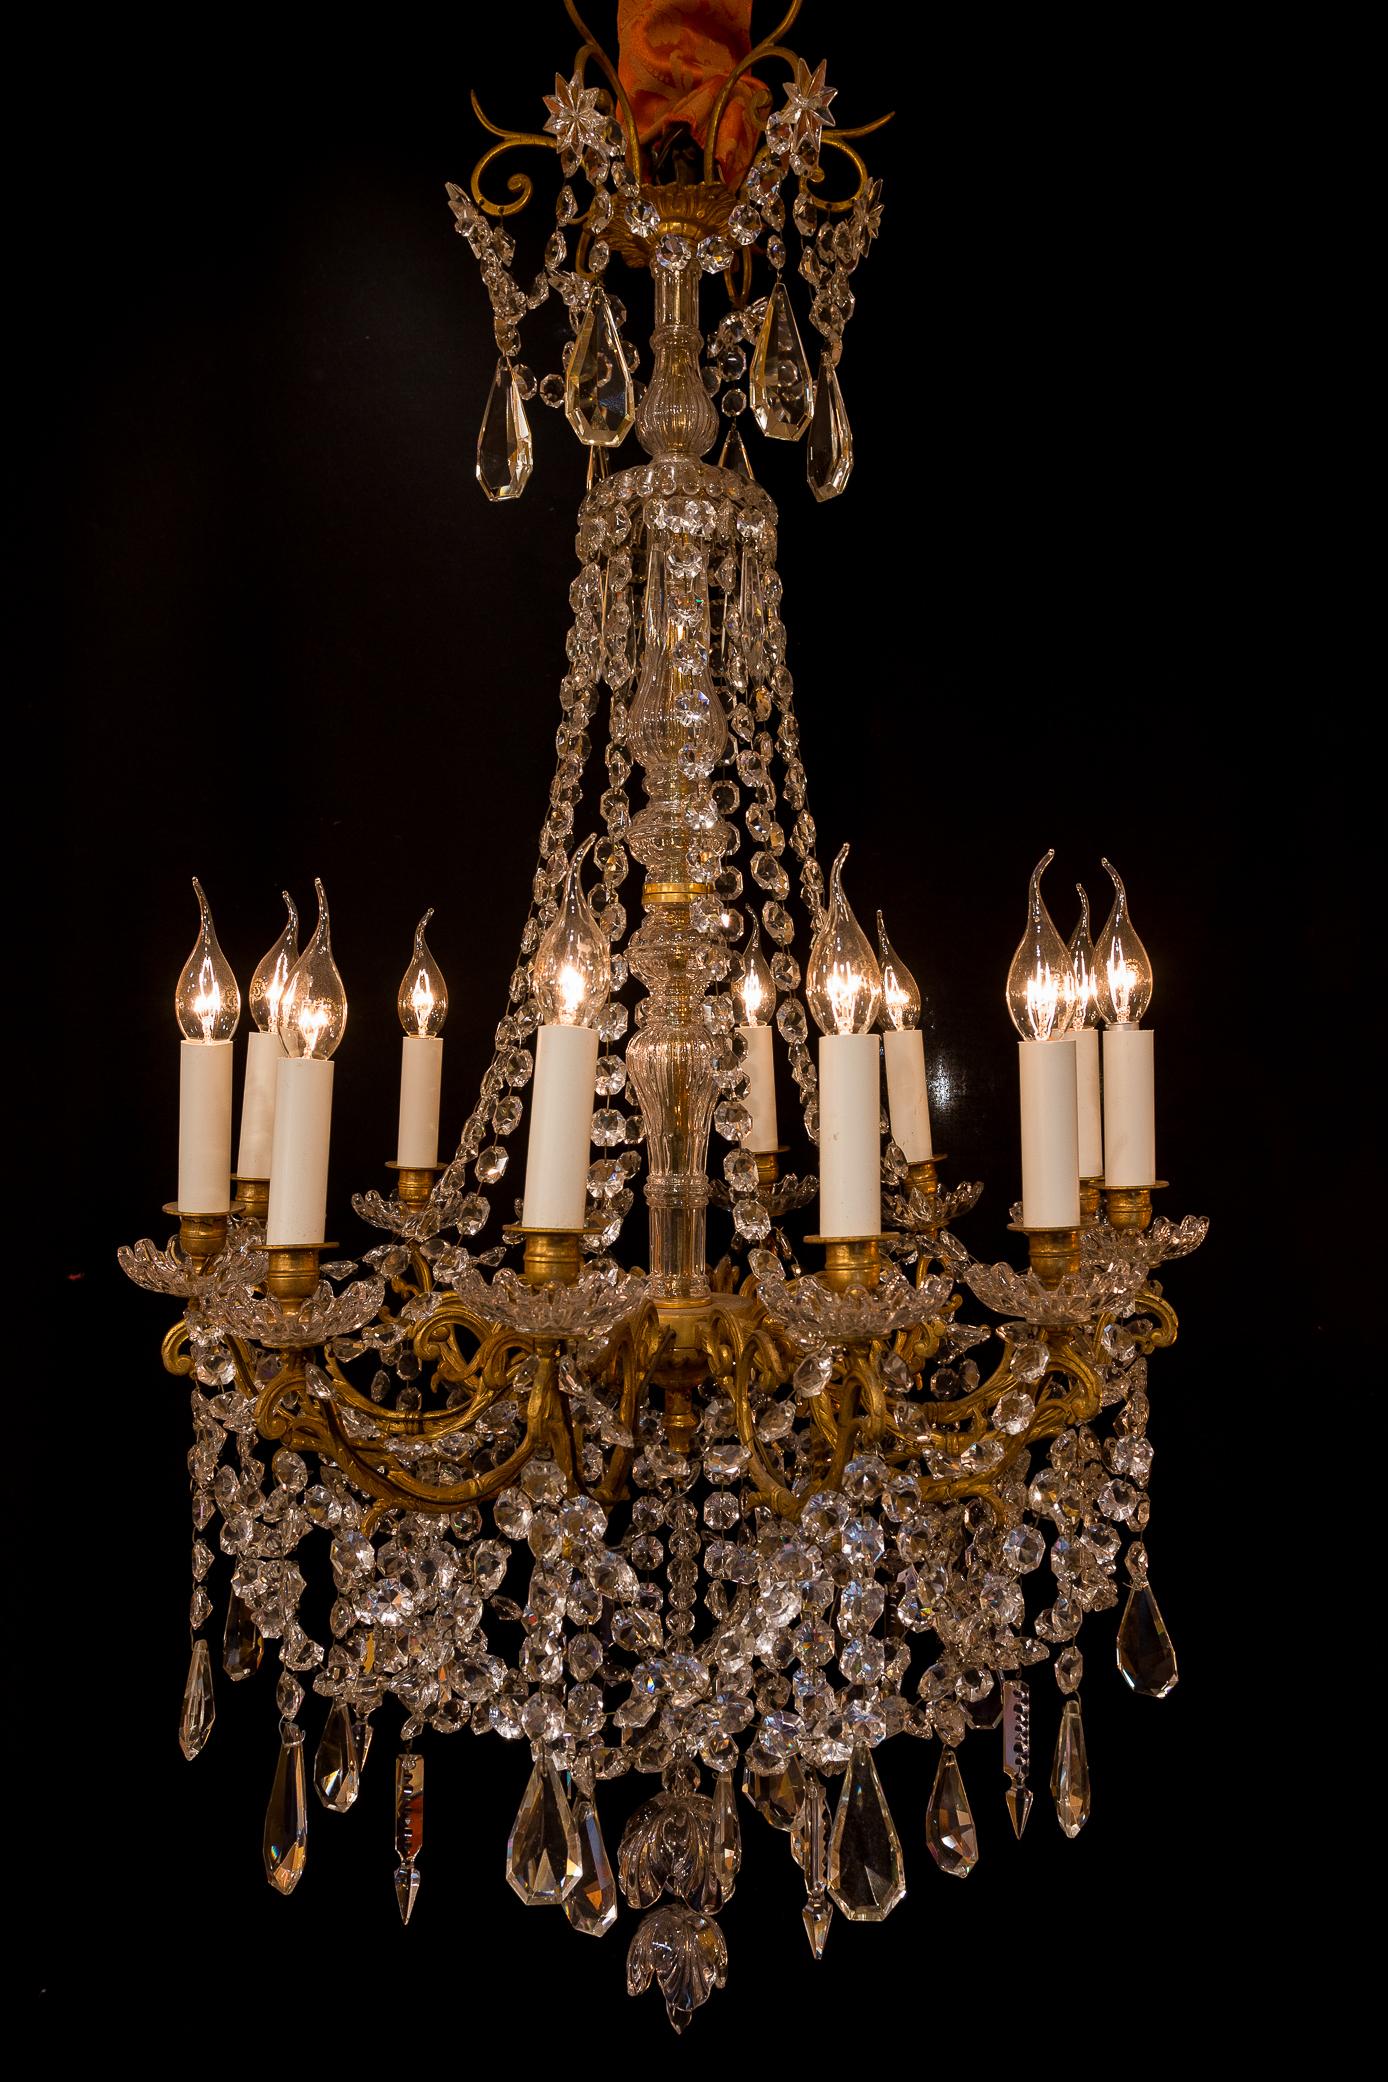 Sign by Baccarat French Louis XVI style bronze and cut crystal chandelier, circa 1870

A lovely and decorative chiseled bronze and cut crystal chandelier in the Classic French Louis XVI style. 
Our chandelier is composed of twelve perimeter